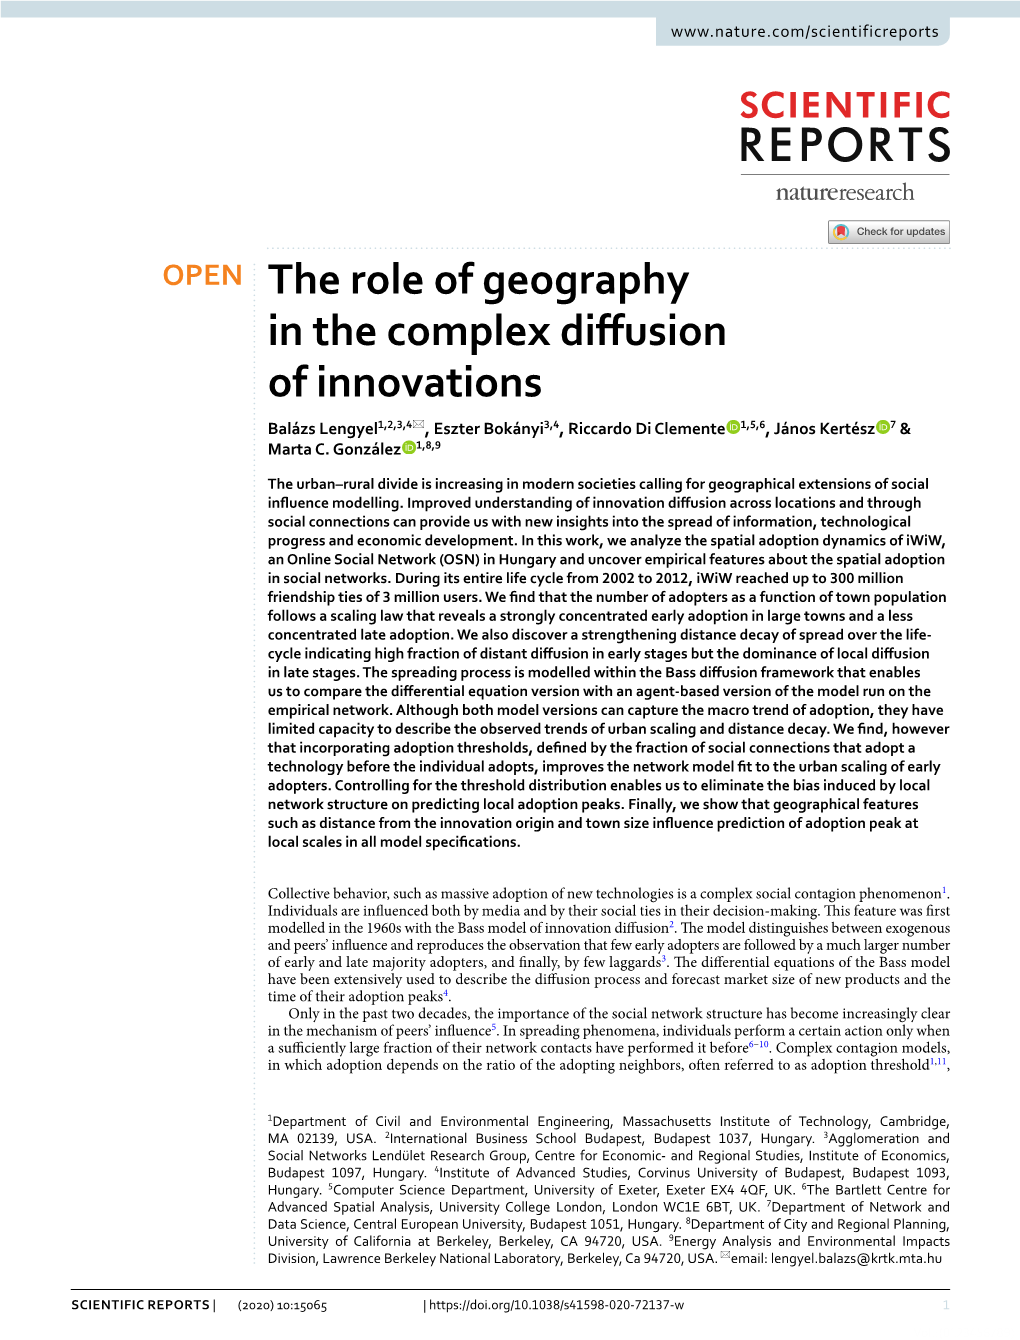 The Role of Geography in the Complex Diffusion of Innovations